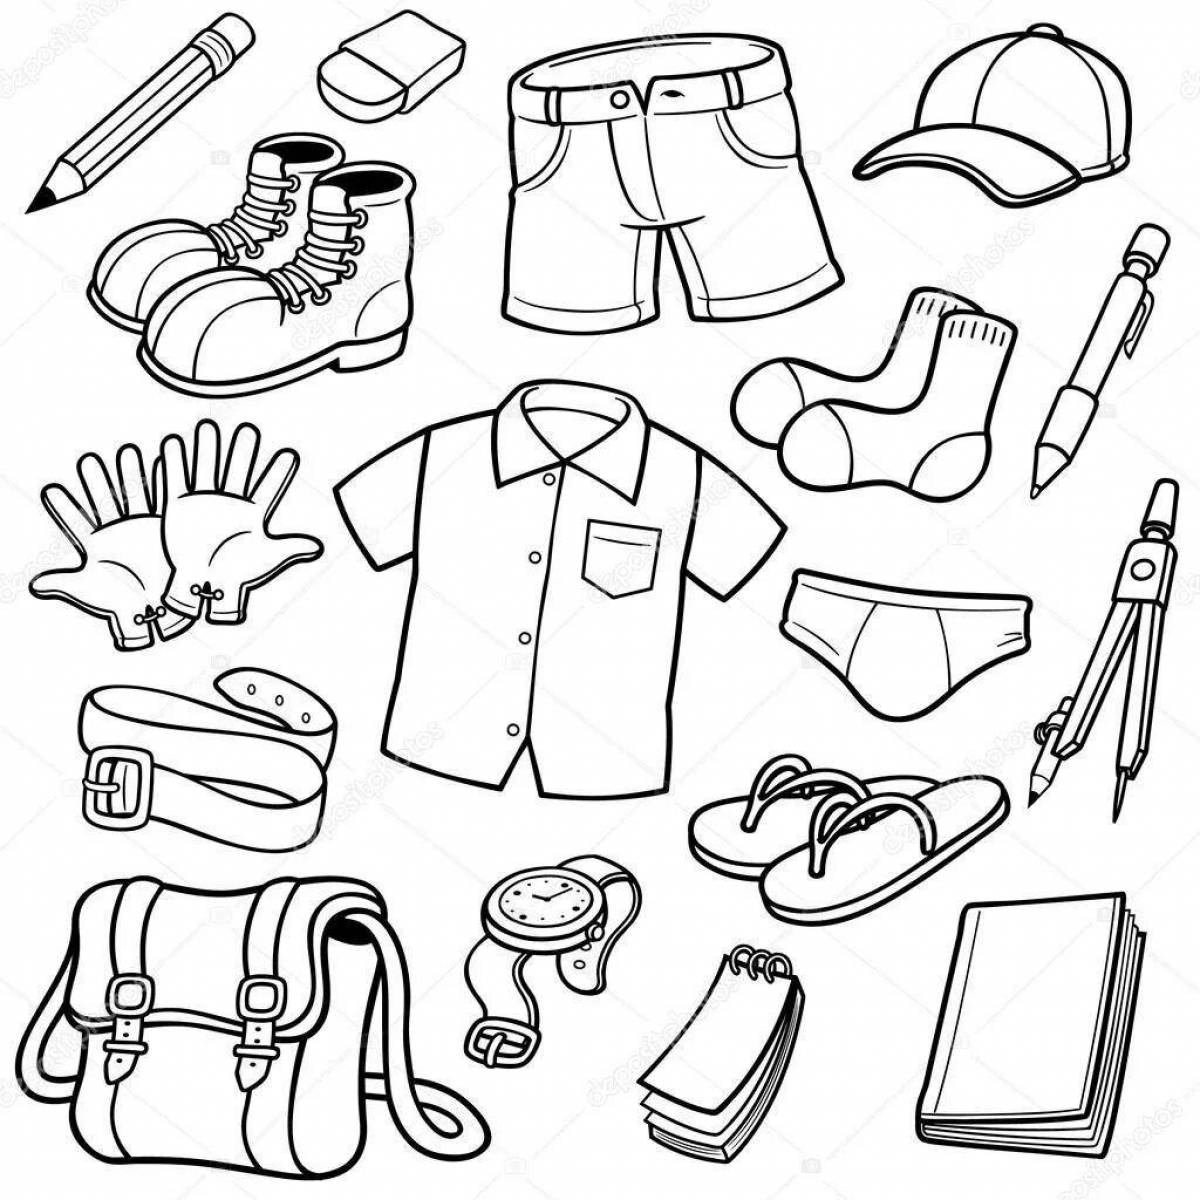 Exciting summer clothes coloring page for kids